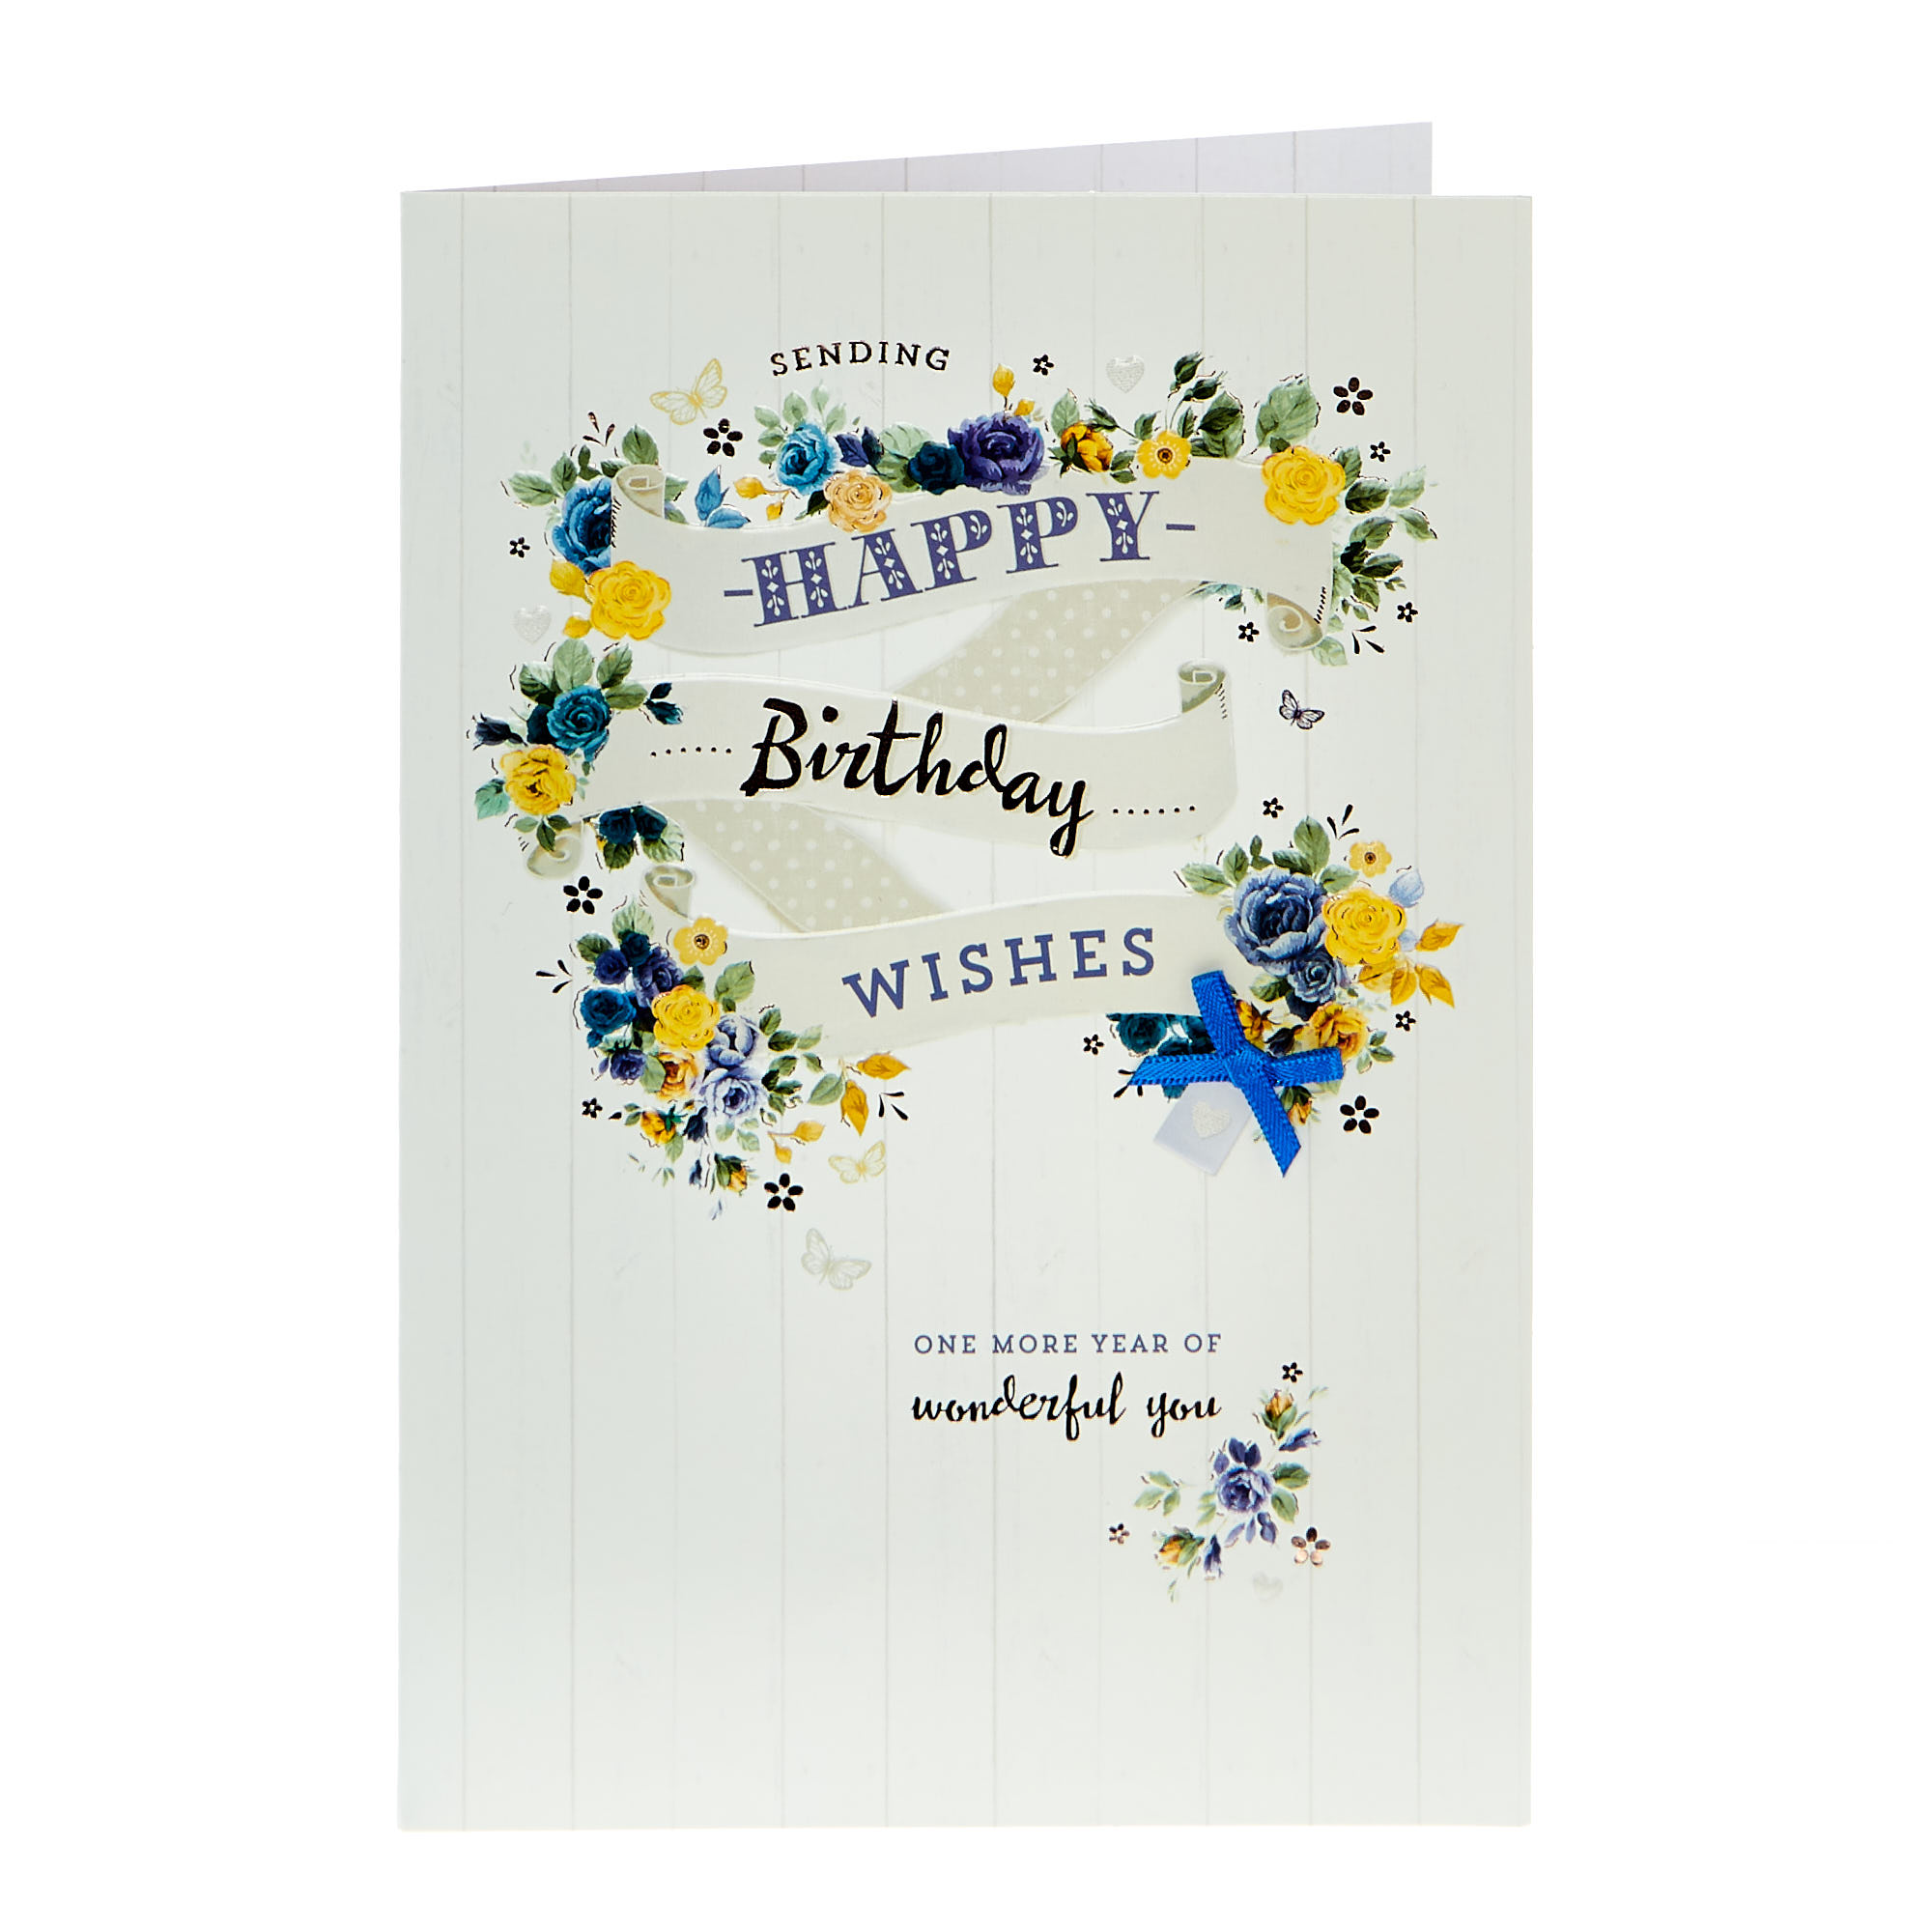 Birthday Card - One More Year Of Wonderful You